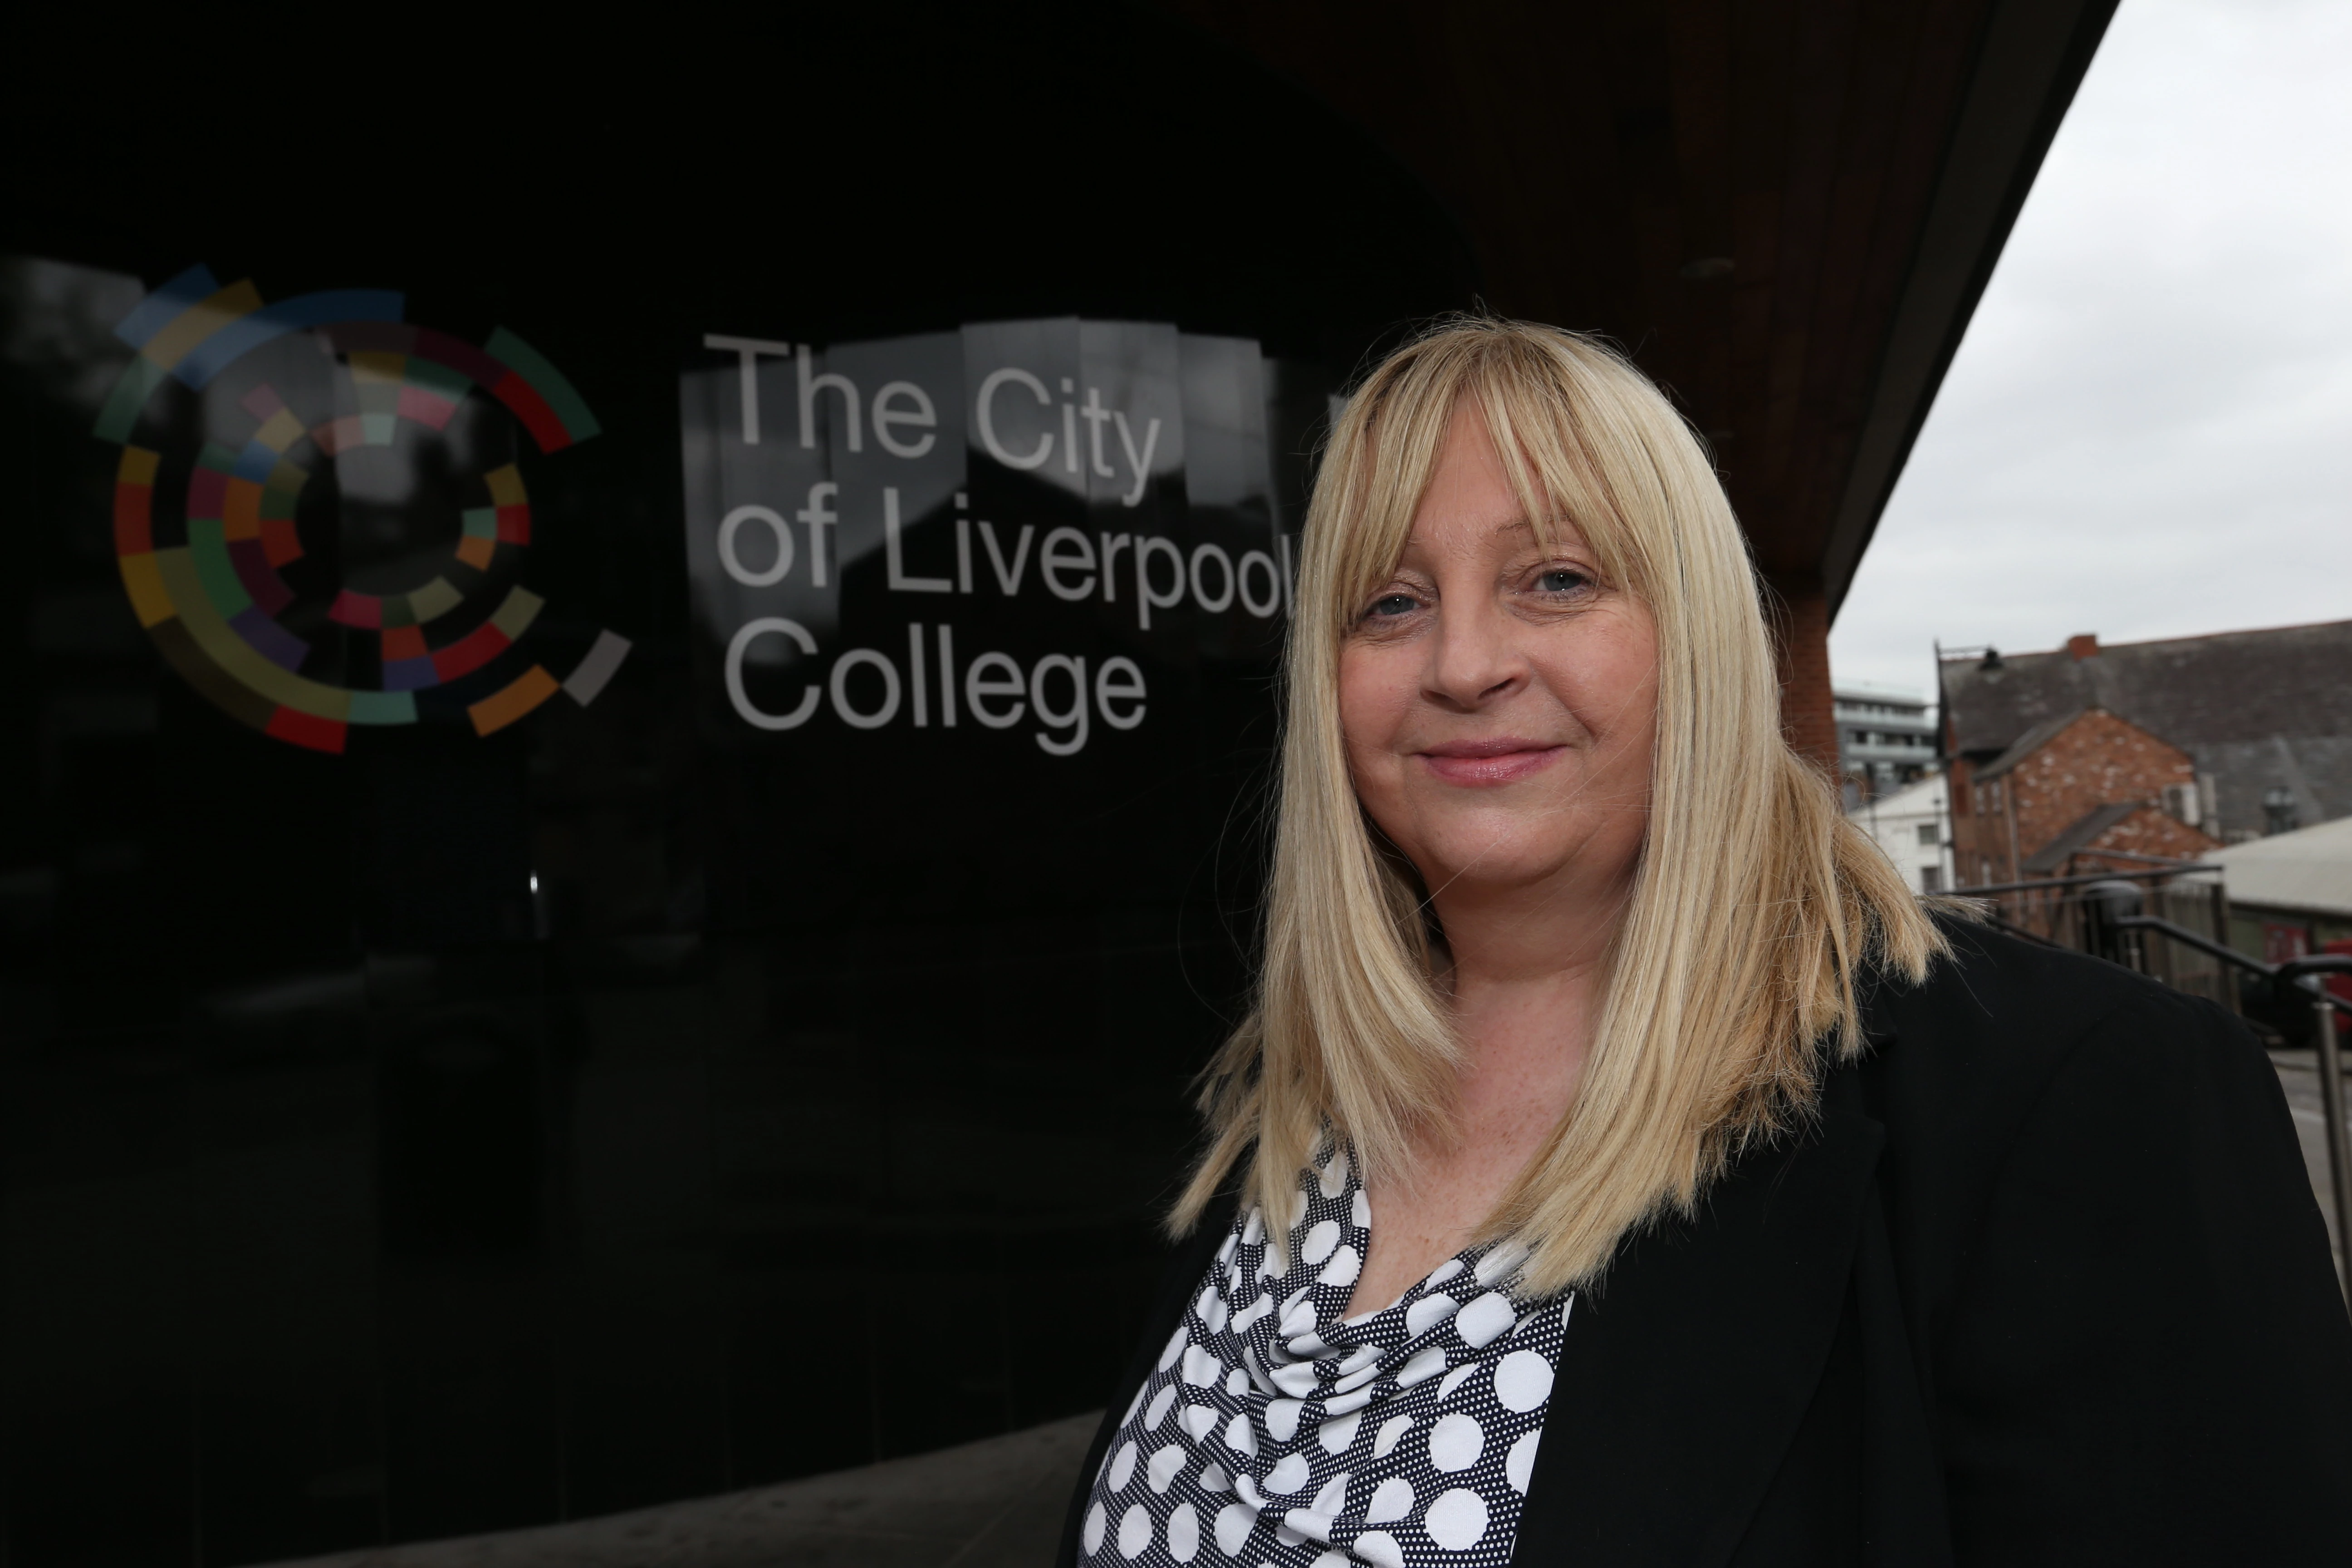 Elaine Bowker, Principal of The City of Liverpool College 